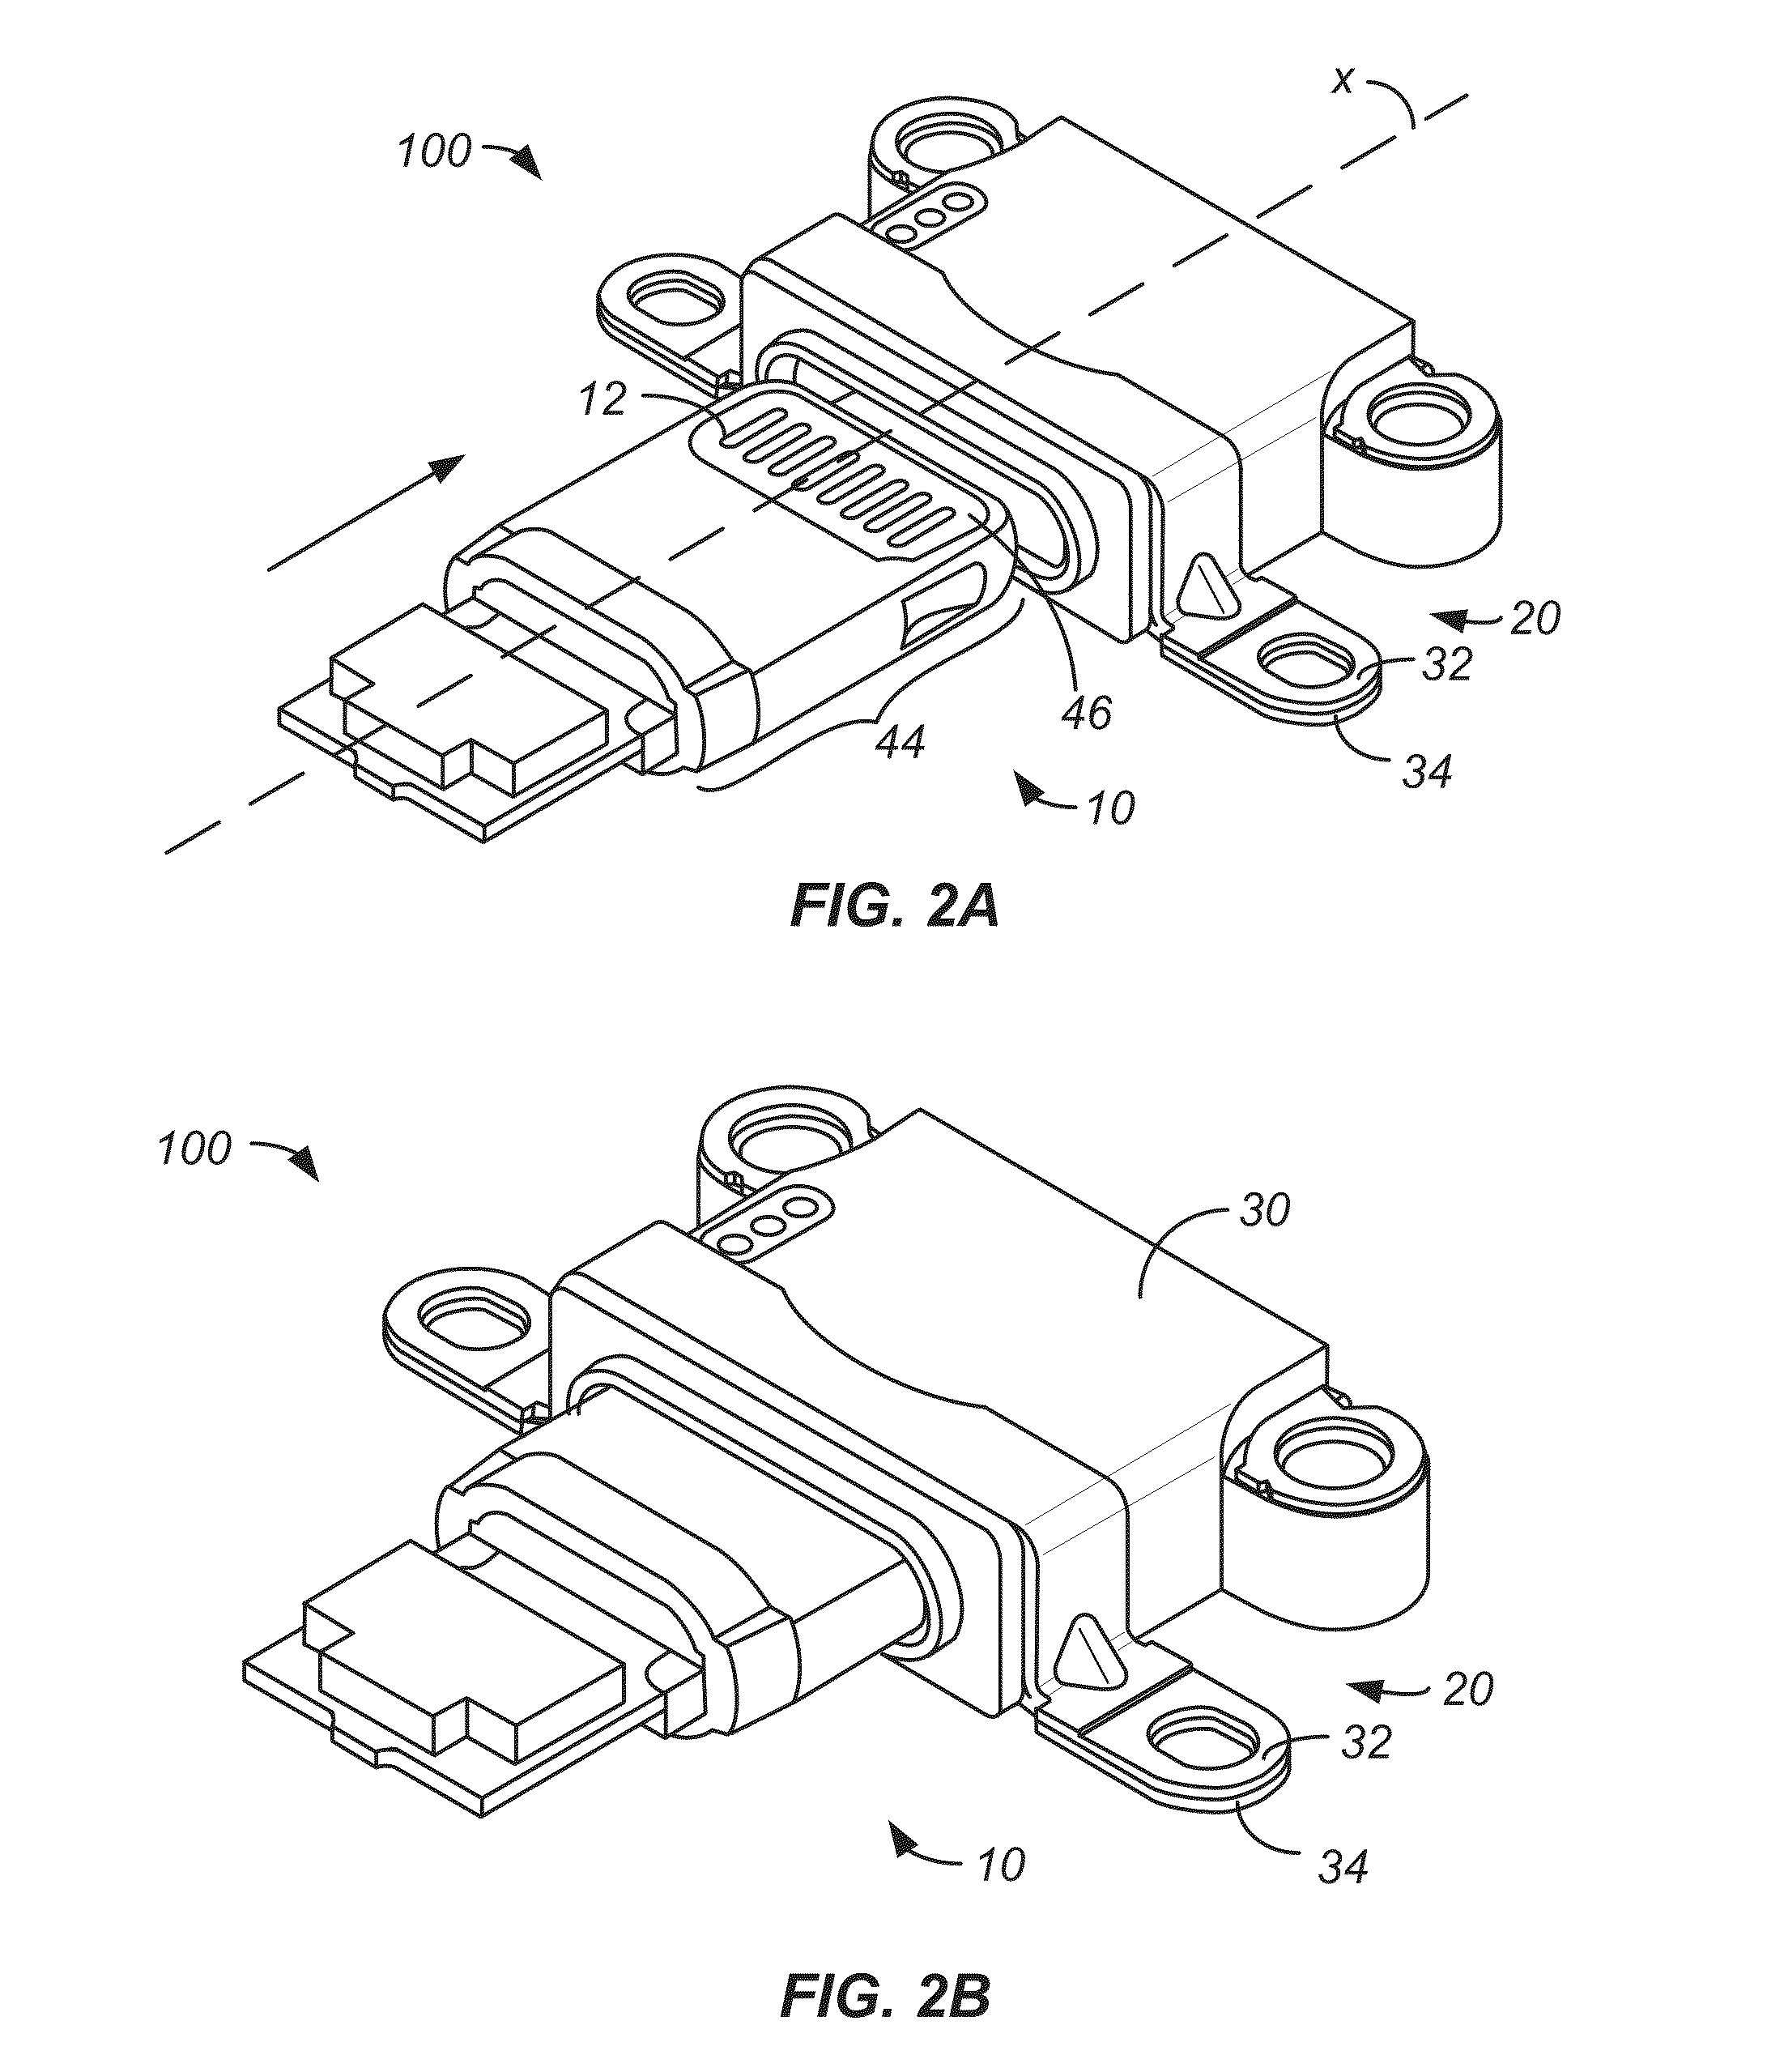 Latch assembly having spring arms each with a retaining portion and a reinforced portion